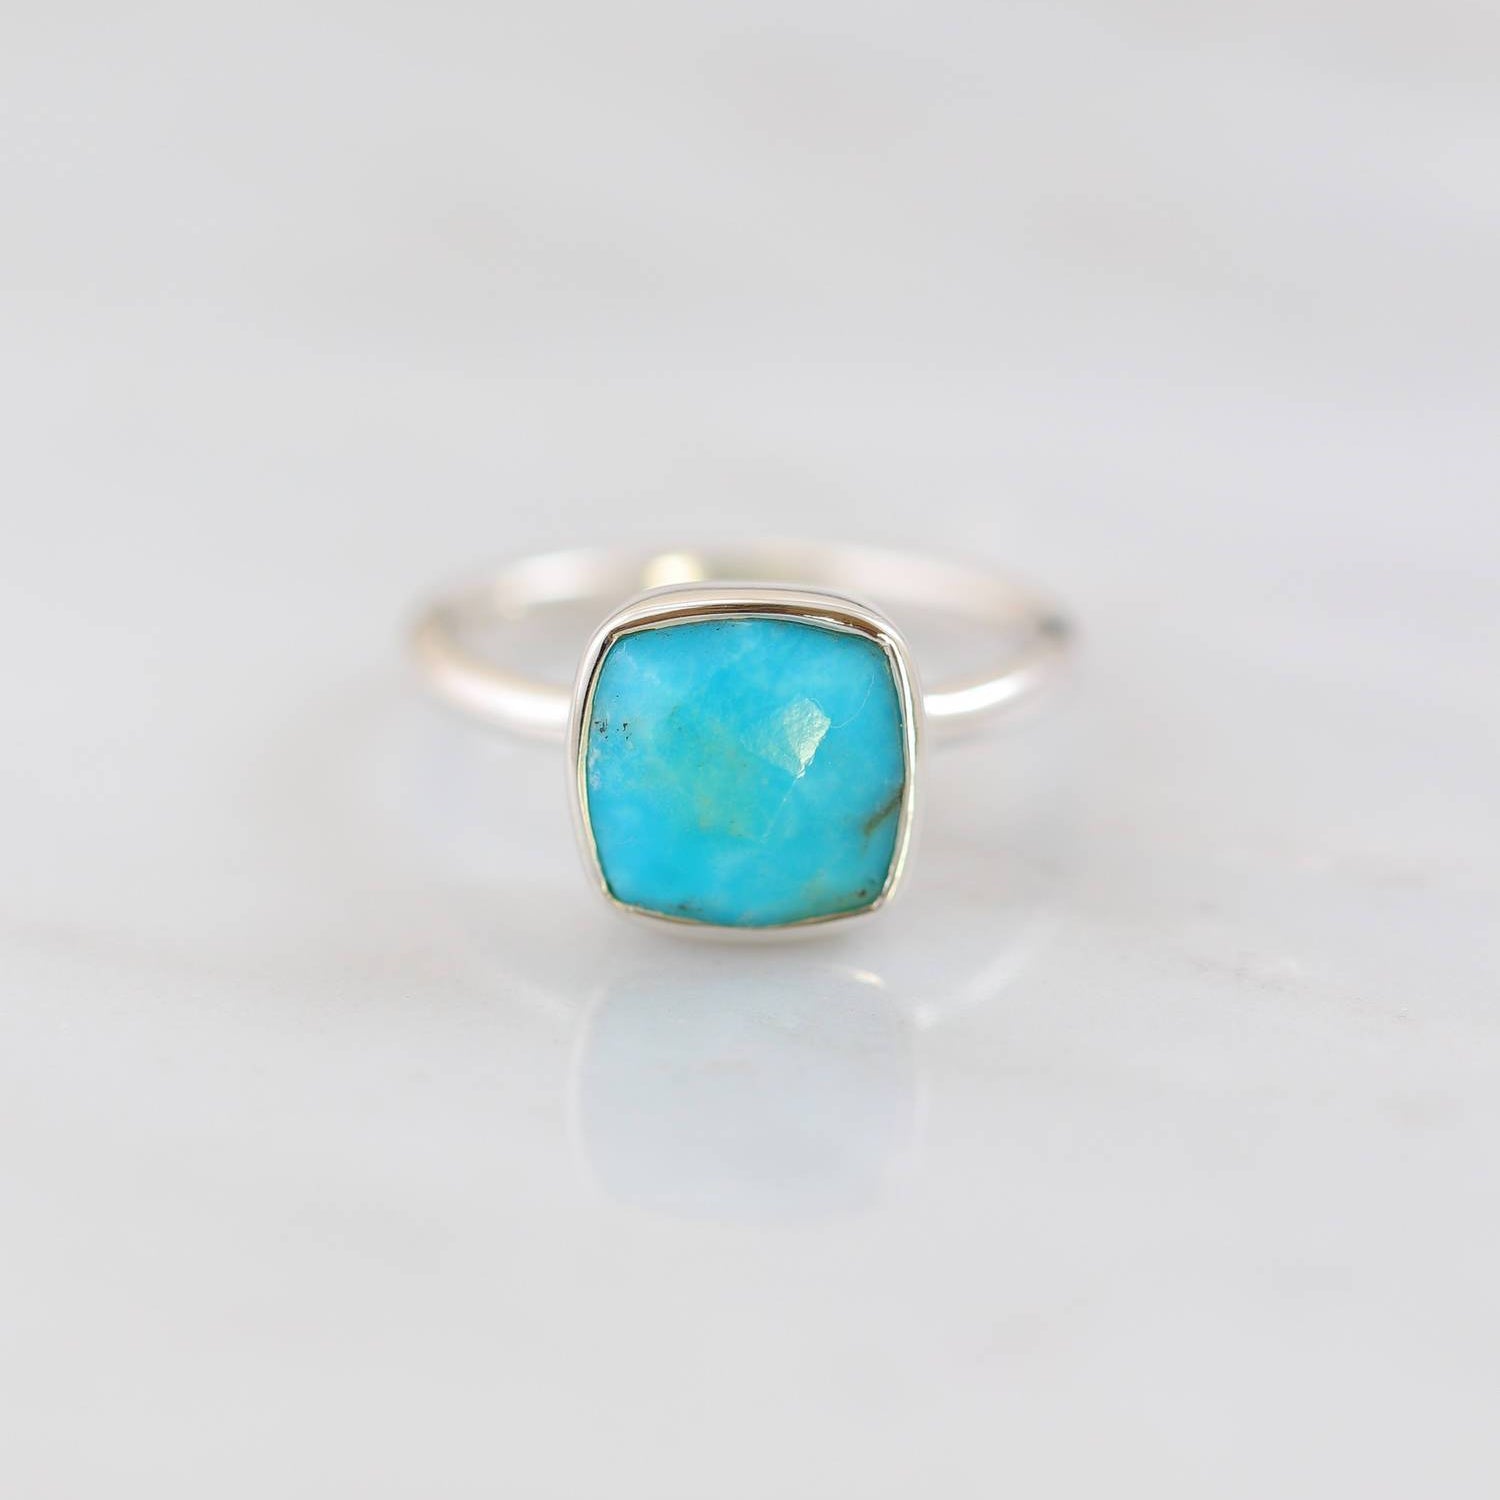 December Birthstone Rings, Cushion cut Ring, Sleeping Beauty Ring, Turquoise Ring, Silver Ring, 925 Silver, Everyday Ring, Stackable rings